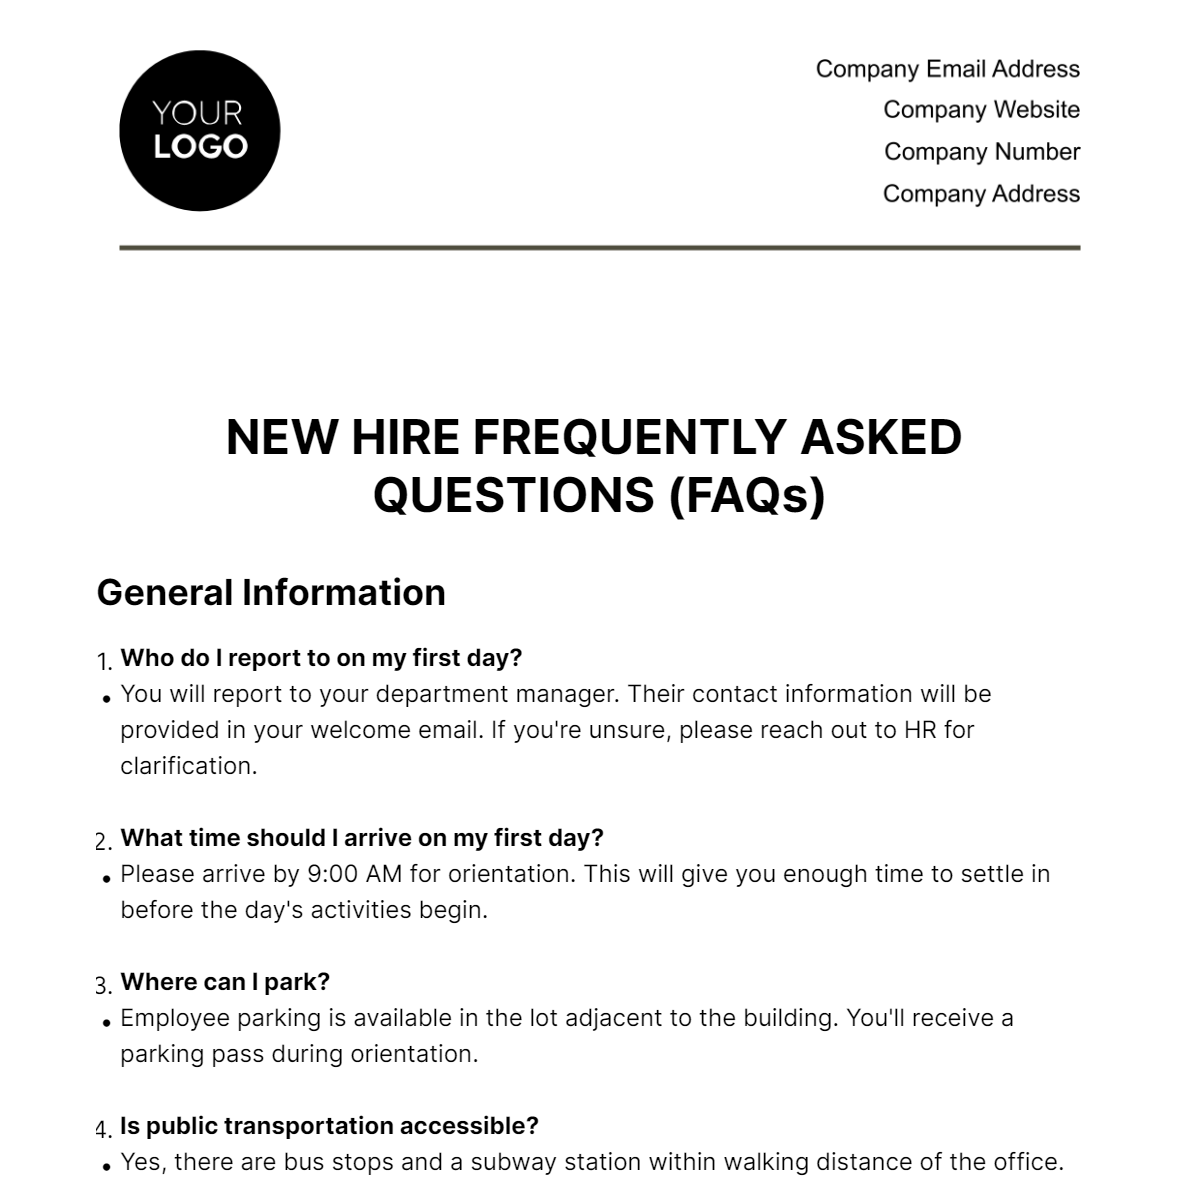 New Hire Frequently Asked Questions (FAQs) HR Template